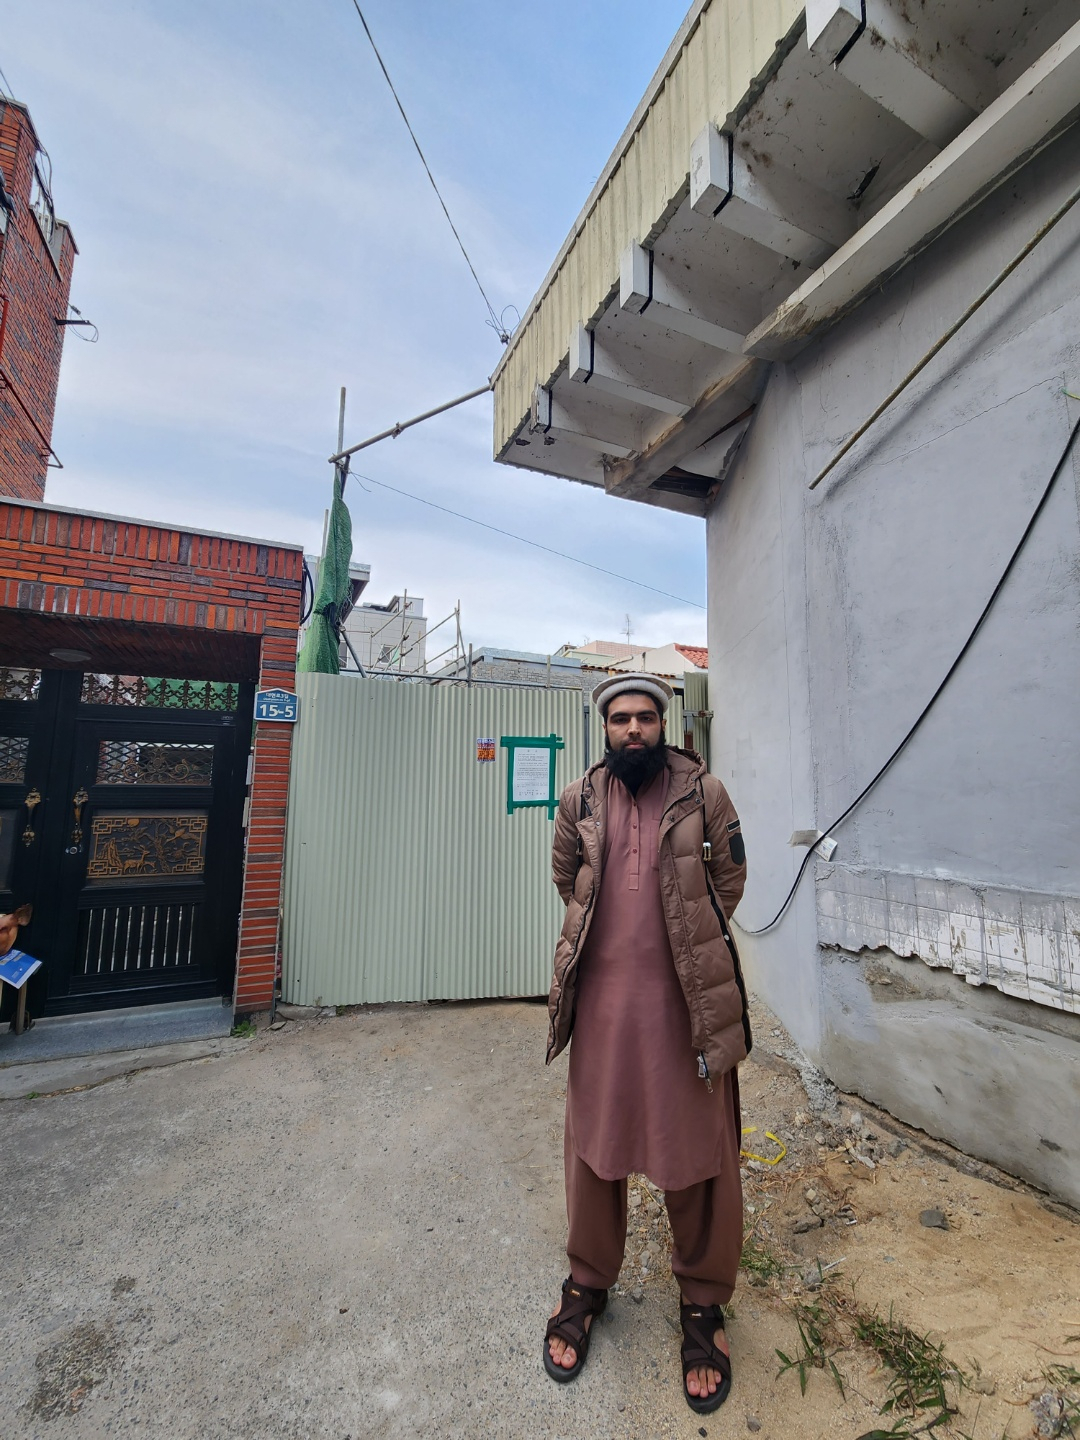 Muaz Razaq, 26, a Muslim student at Kyungpook National University, stands in front of the construction site for a mosque in Daegu on Wednesday. (Choi Jae-hee/The Korea Herald)